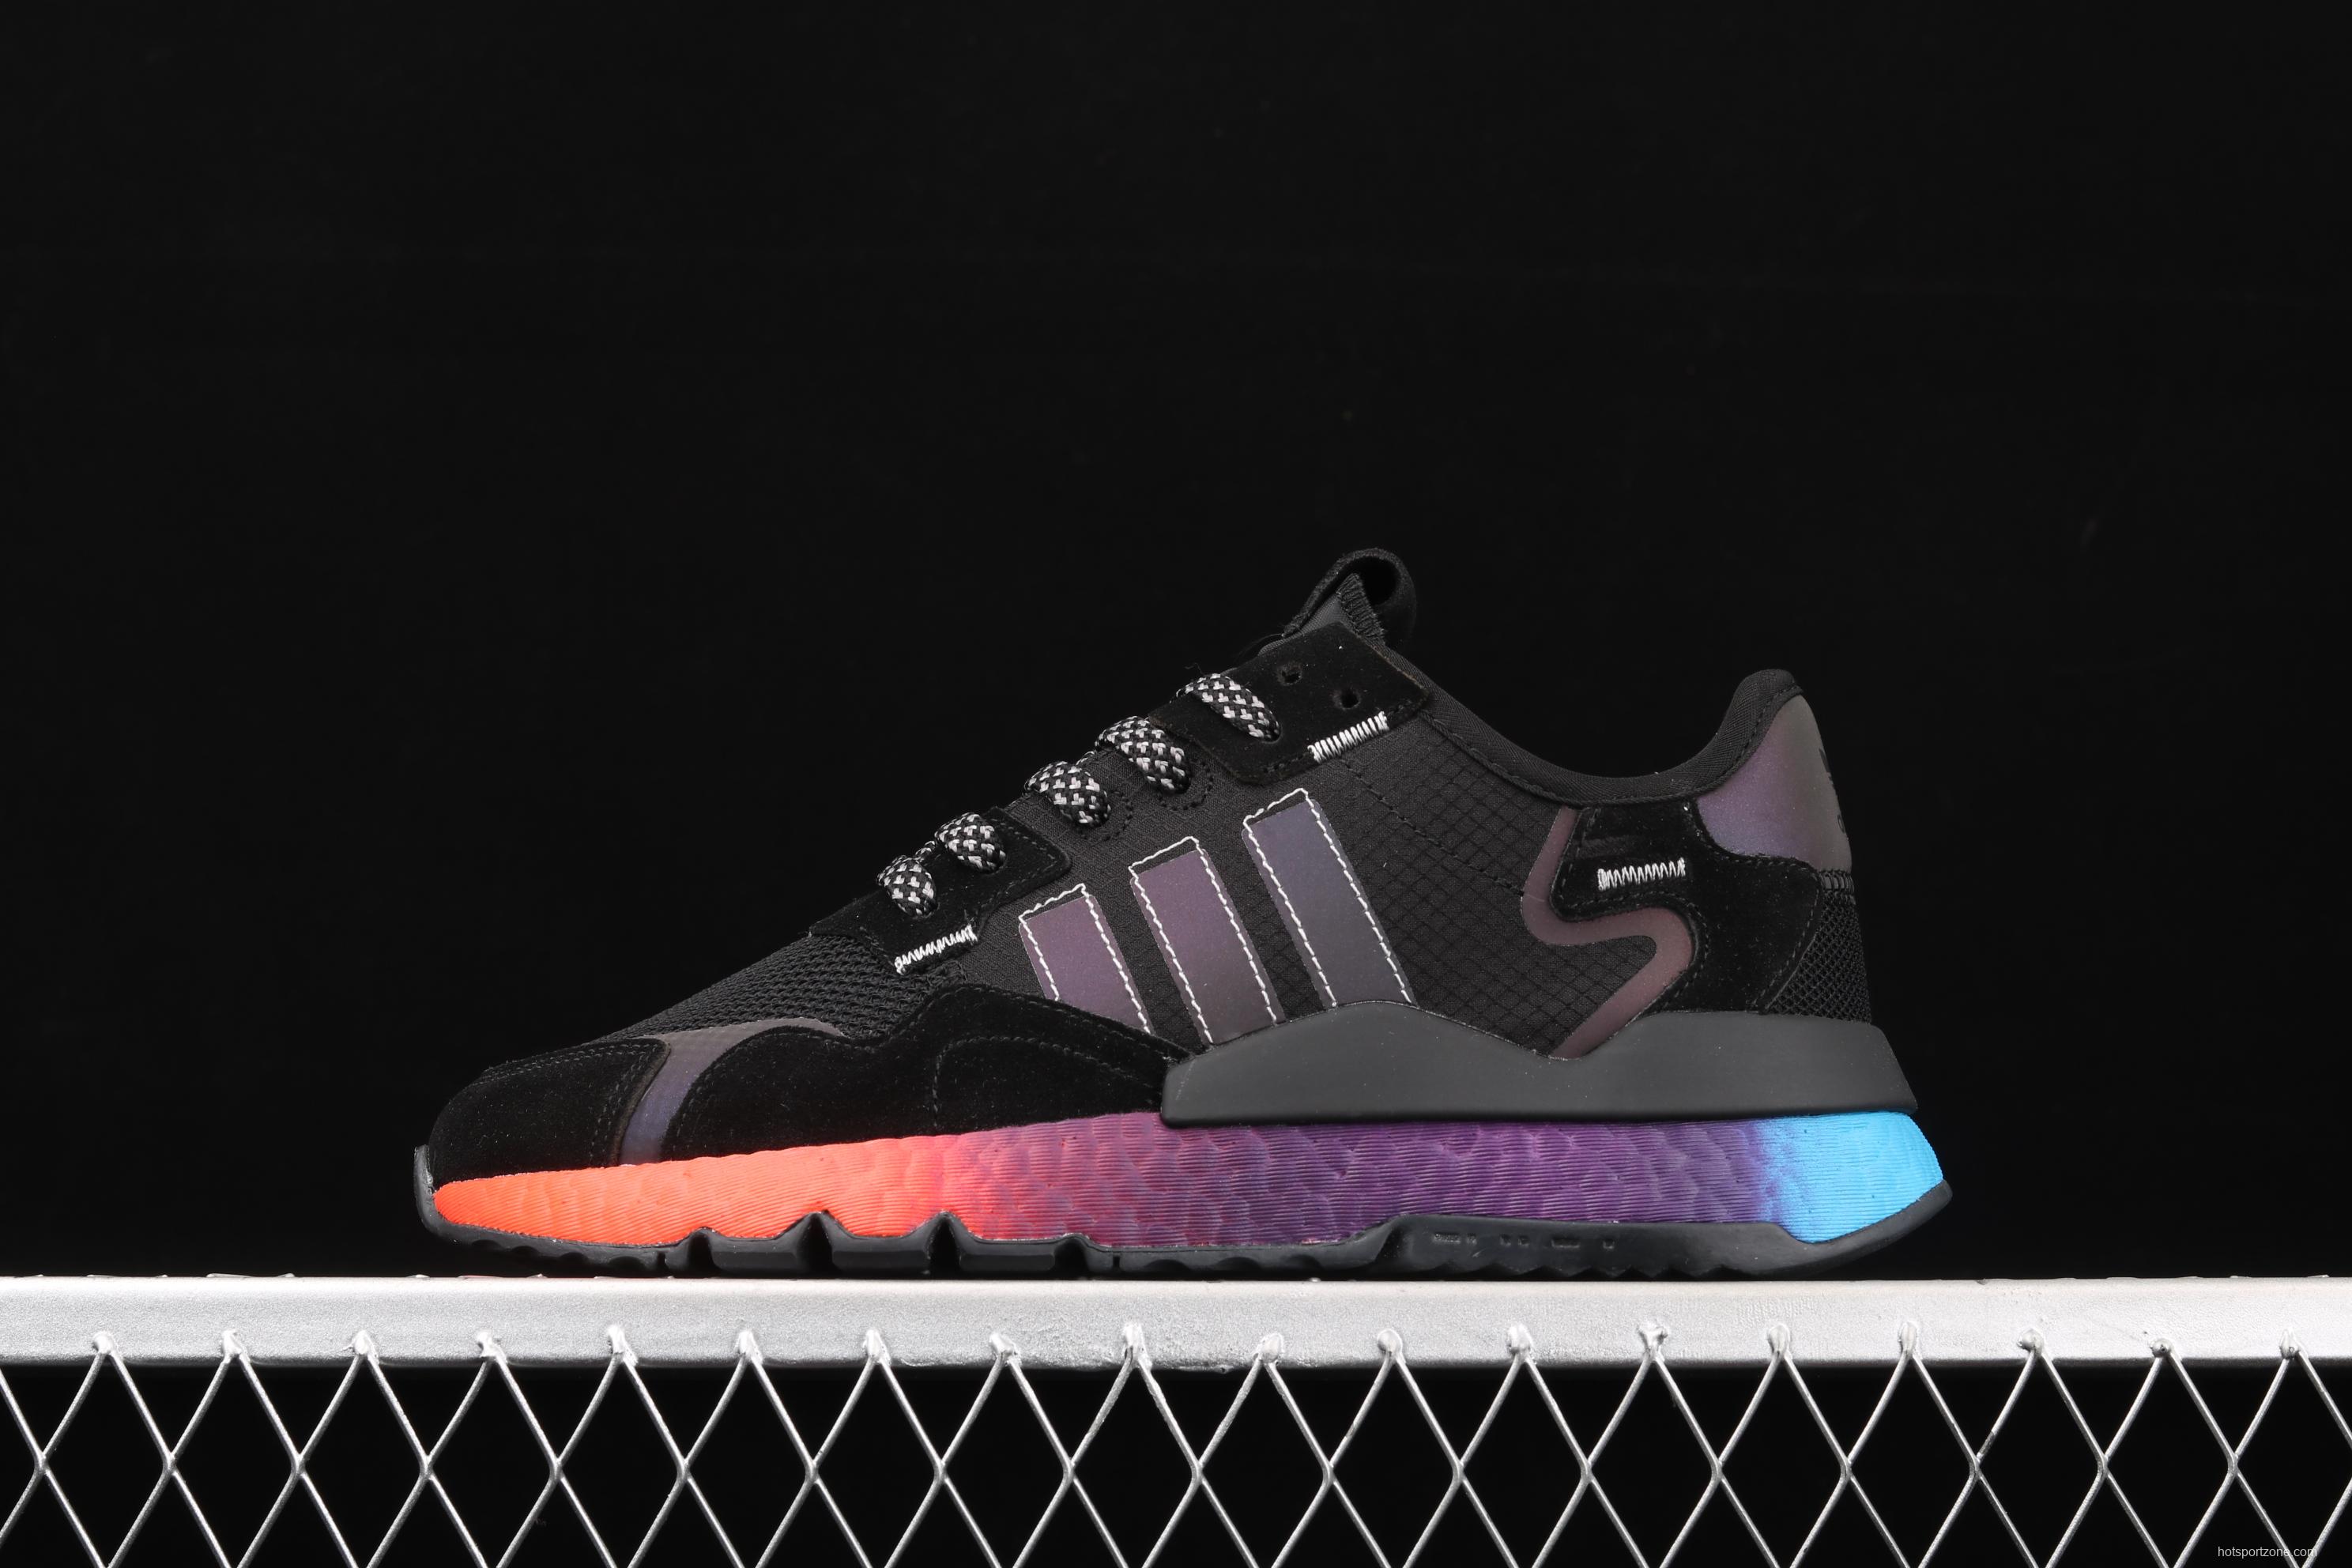 Adidas Nite Jogger 2019 Boost FX1397 3M reflective vintage running shoes